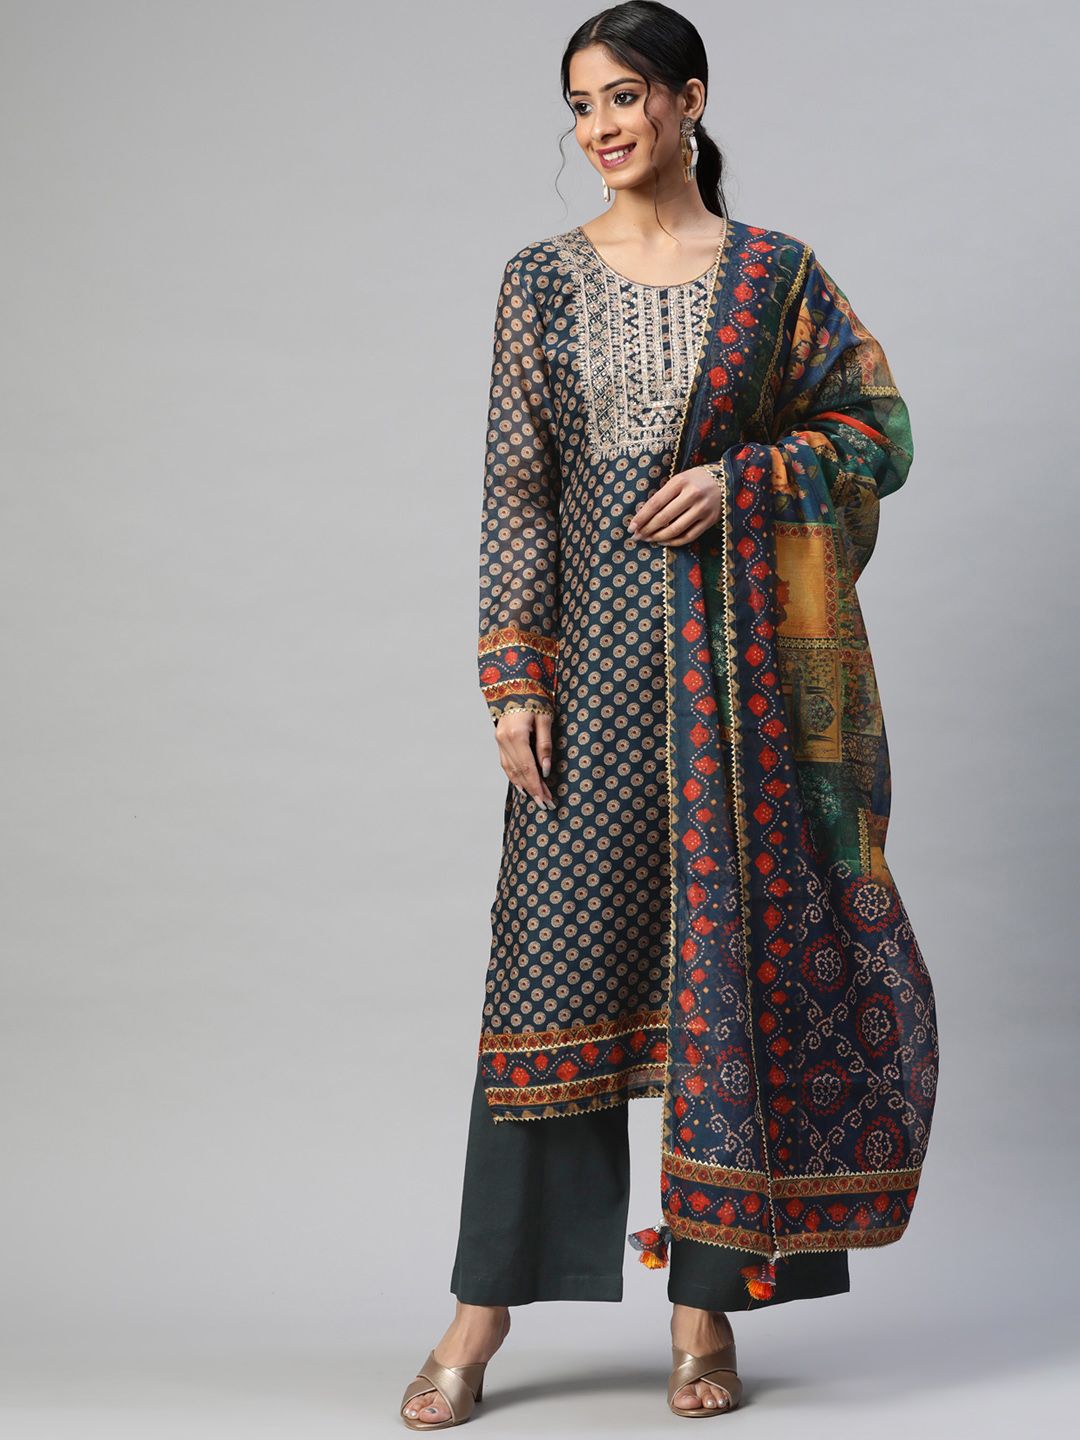 Readiprint Fashions Navy Blue & Beige Printed Unstitched Dress Material Price in India